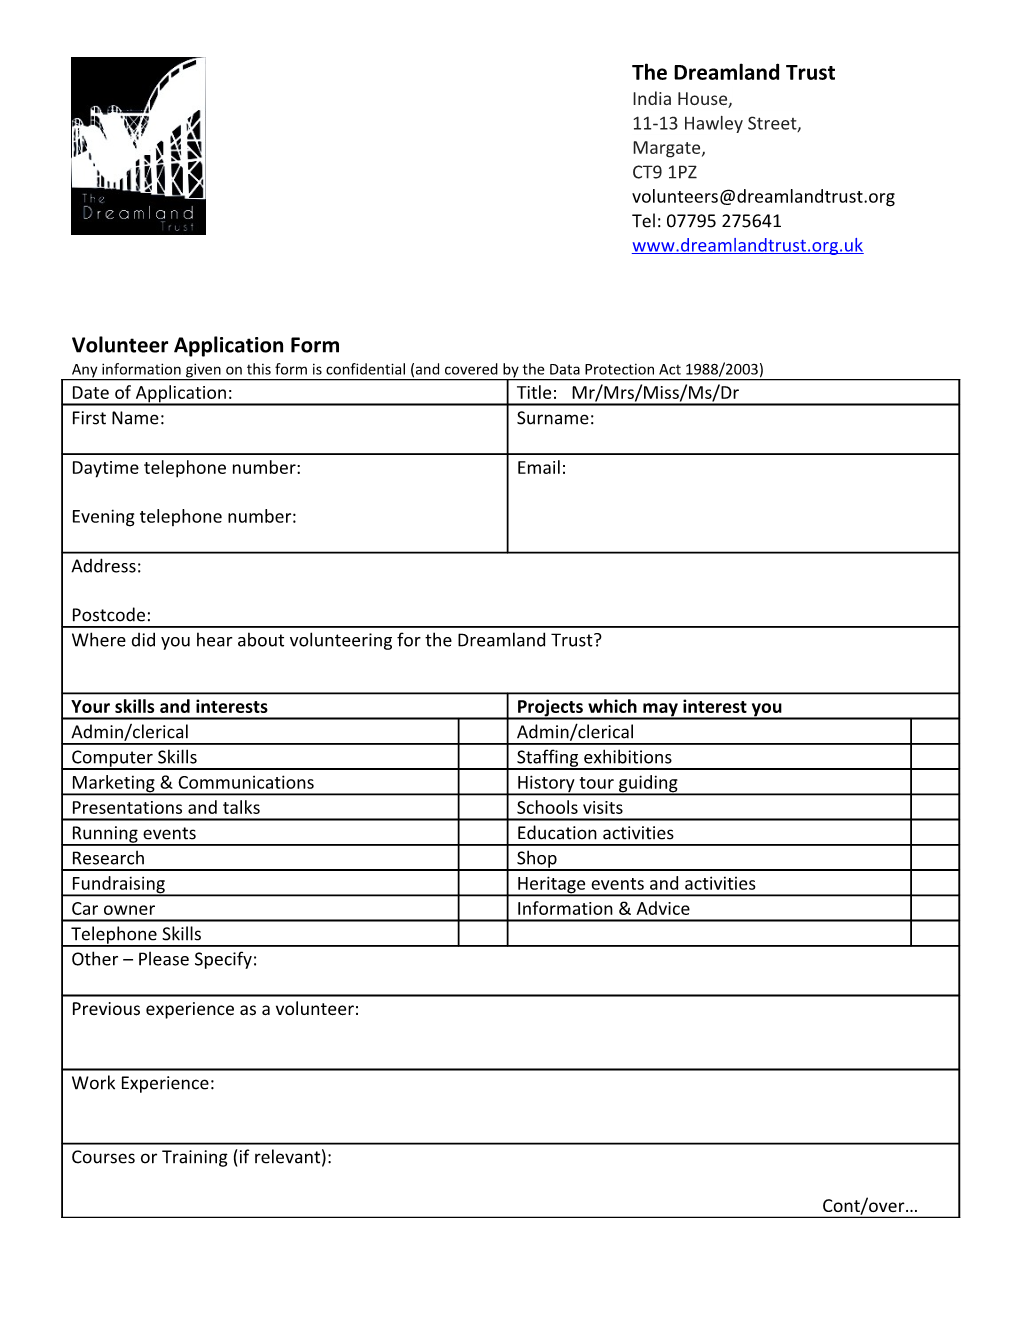 Any Information Given on This Form Is Confidential (And Covered by the Data Protection